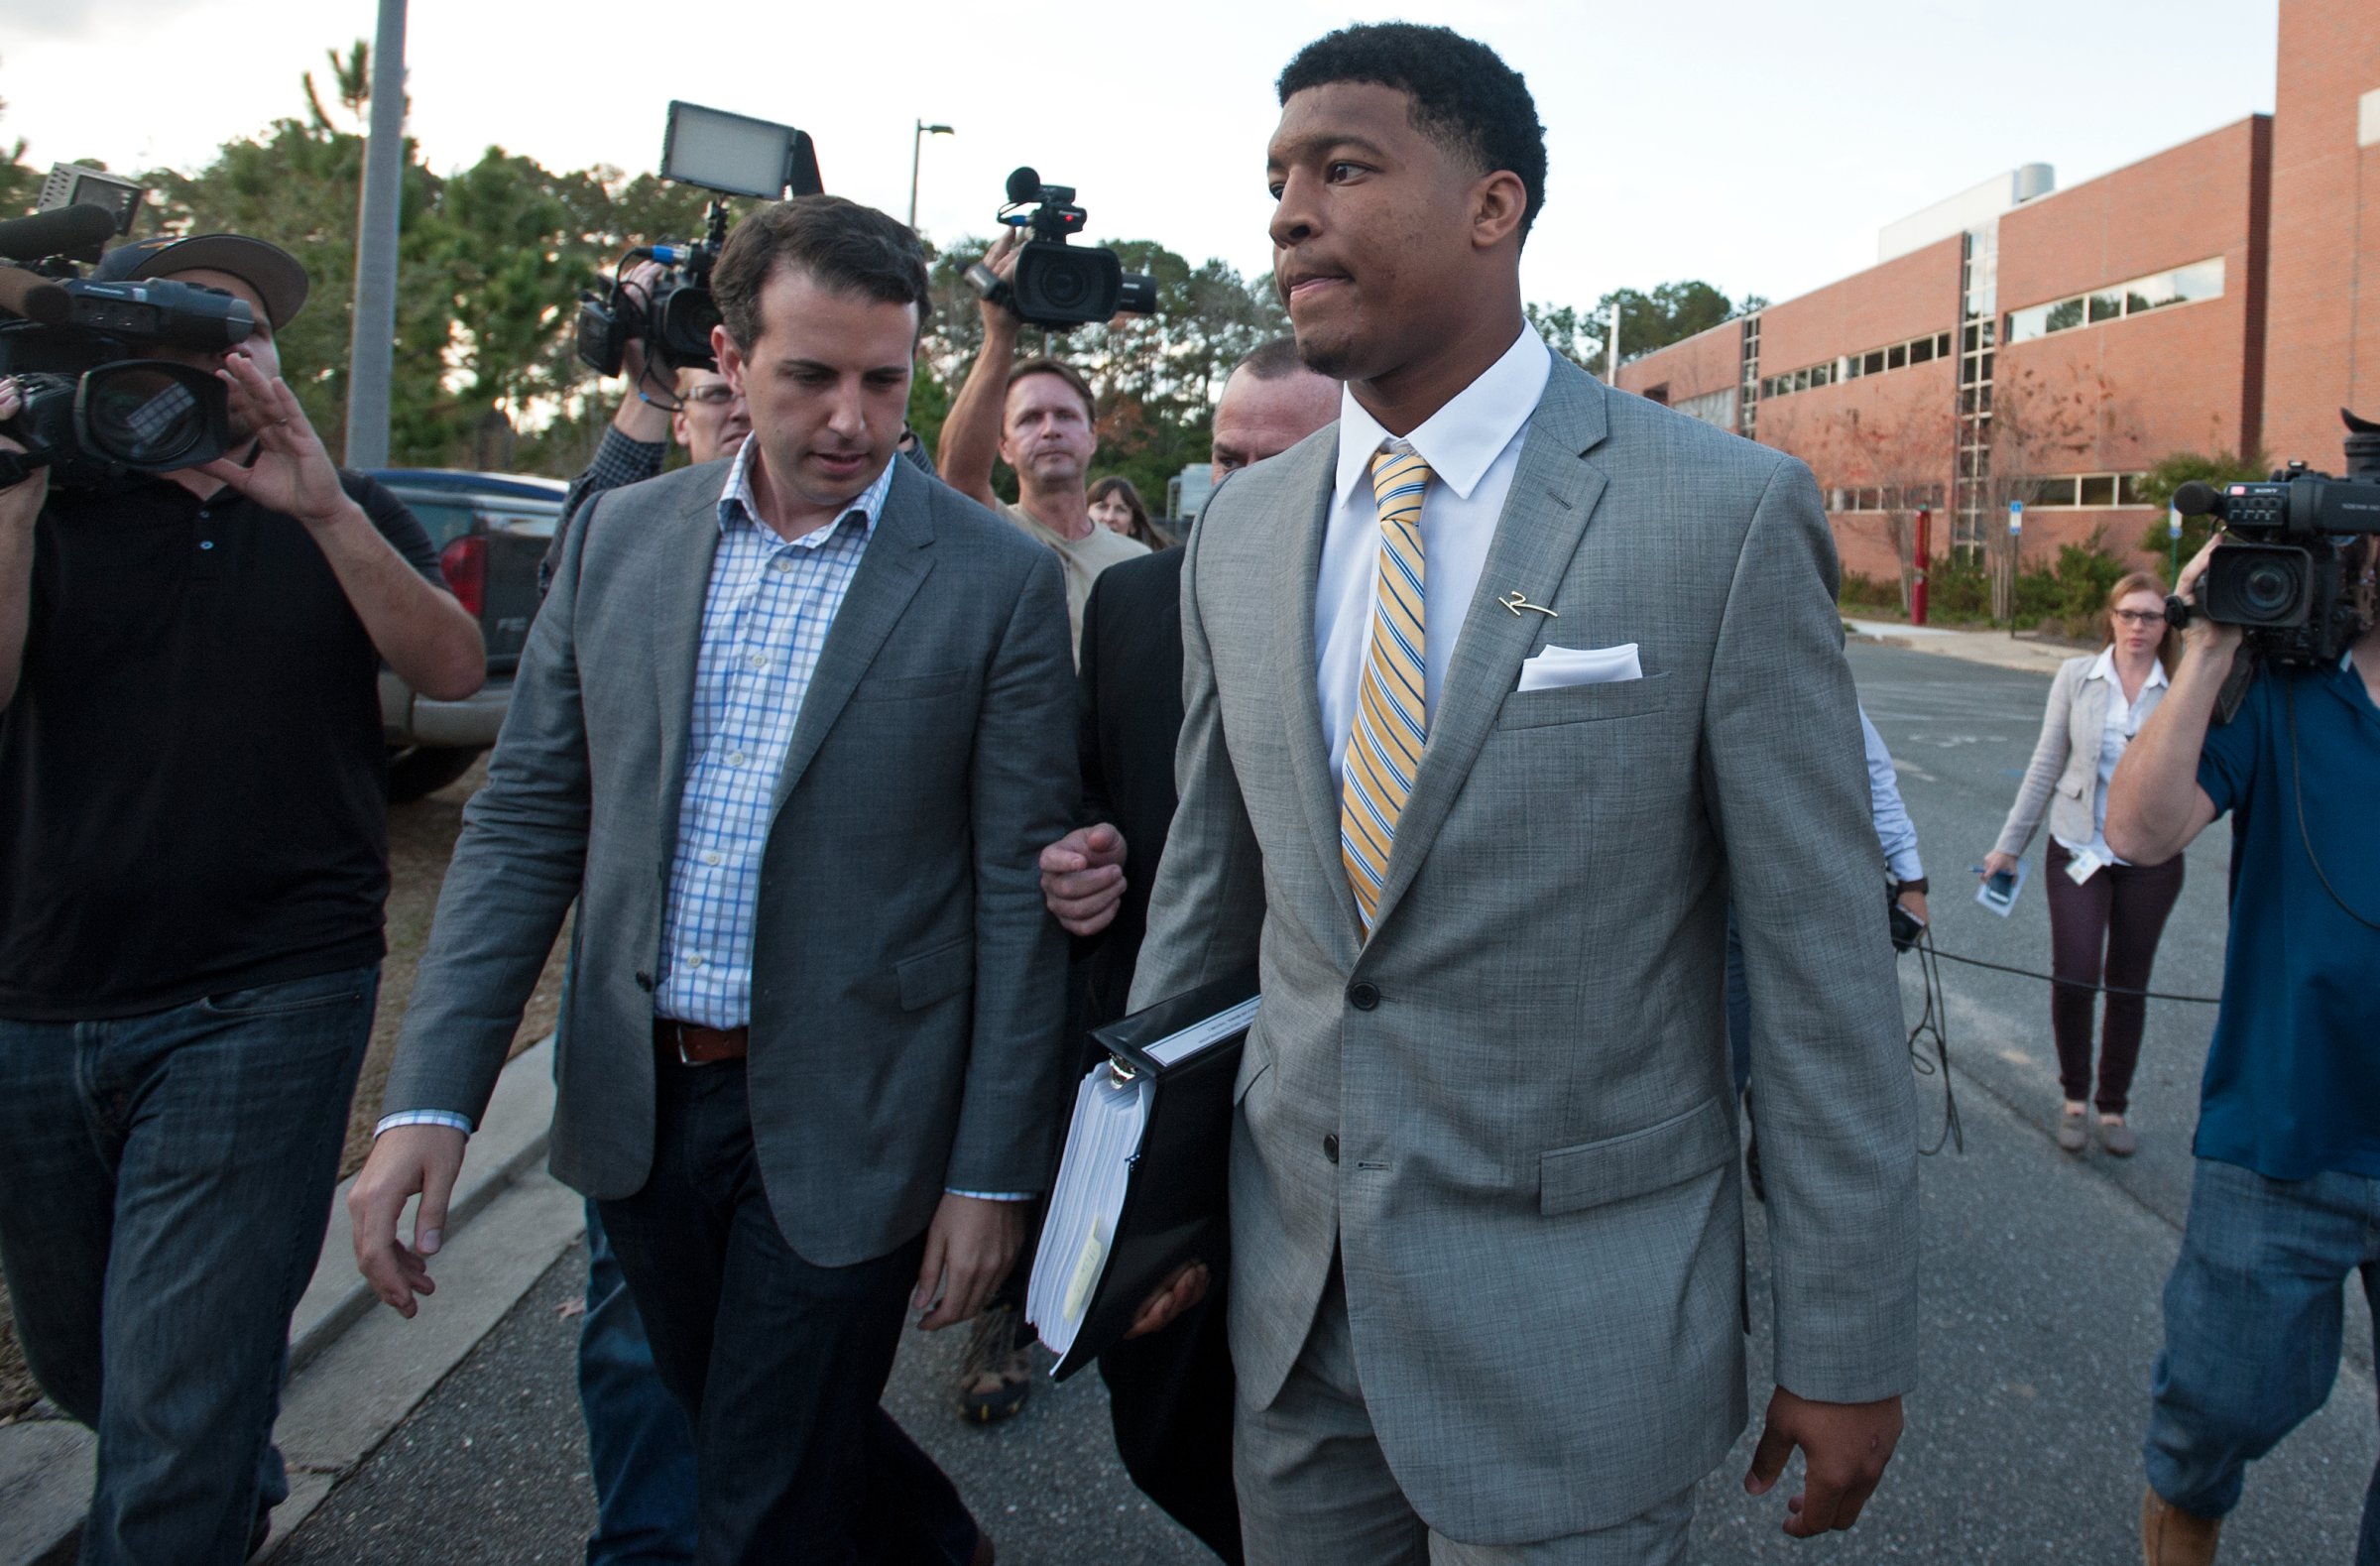 Florida State Seminoles quaterback Jameis Winston leaves his student conduct code hearing in Tallahassee, Florida on Dec. 2, 2014.